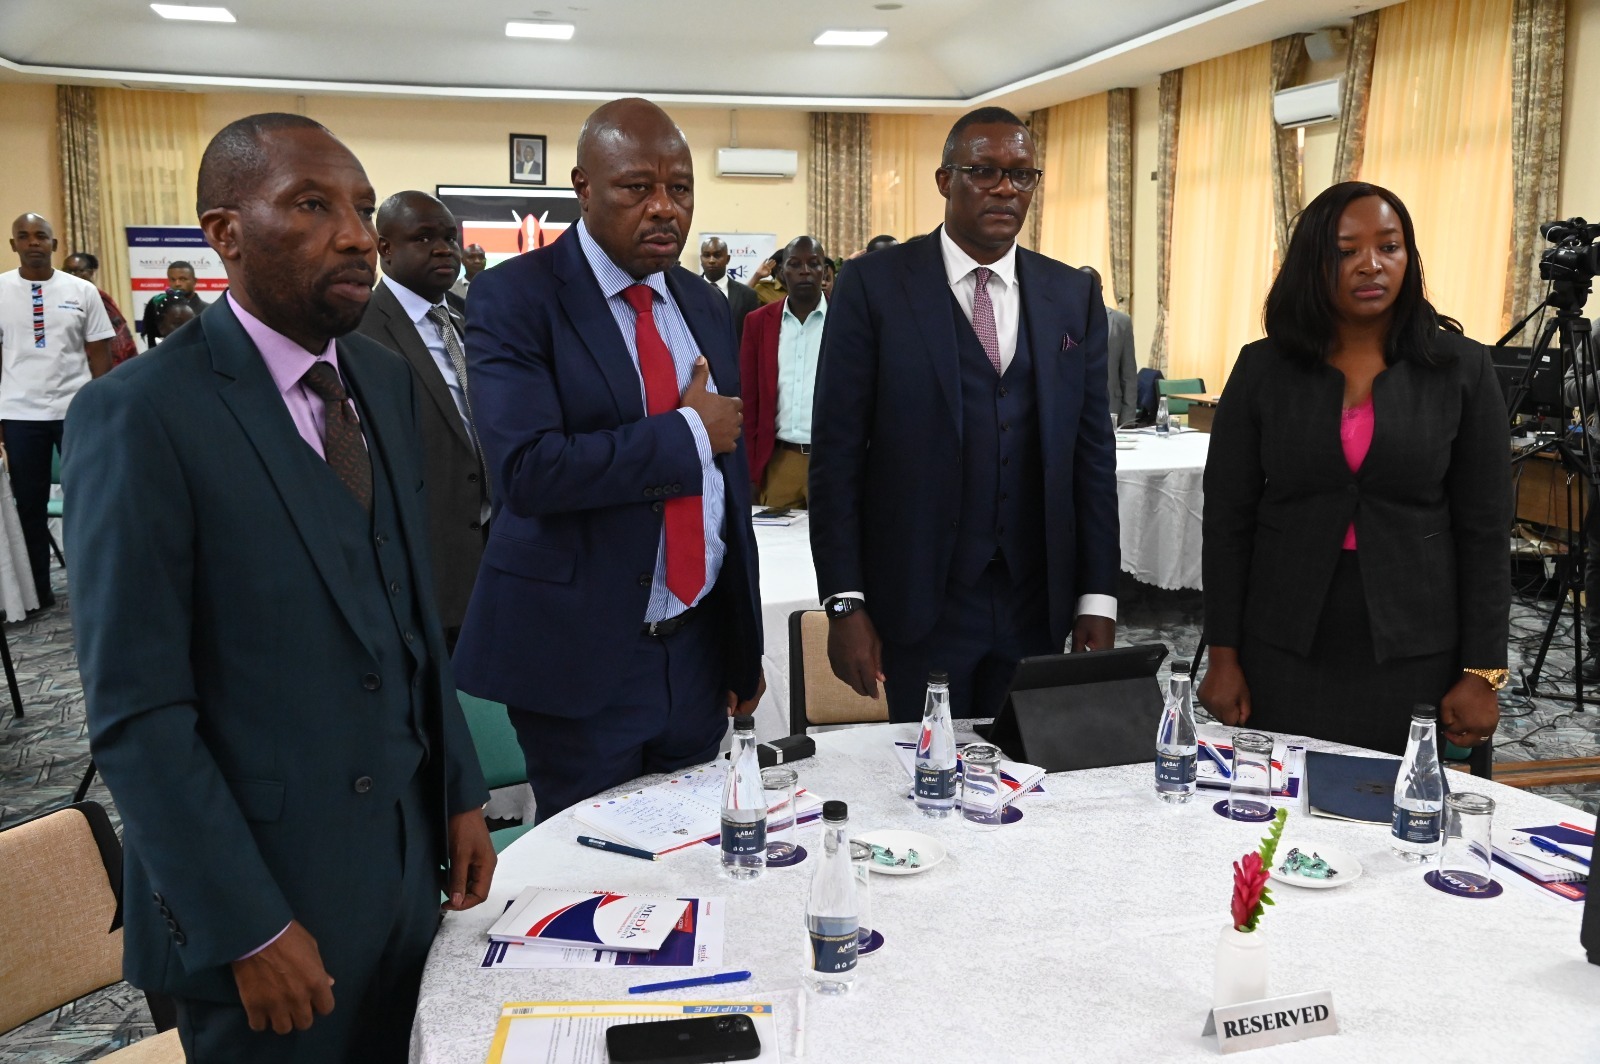 CS Eliud Owalo and PS Edward Kisiangani (at the centre) in an event held to mark International Day for Universal Access to Information (IDUAI).